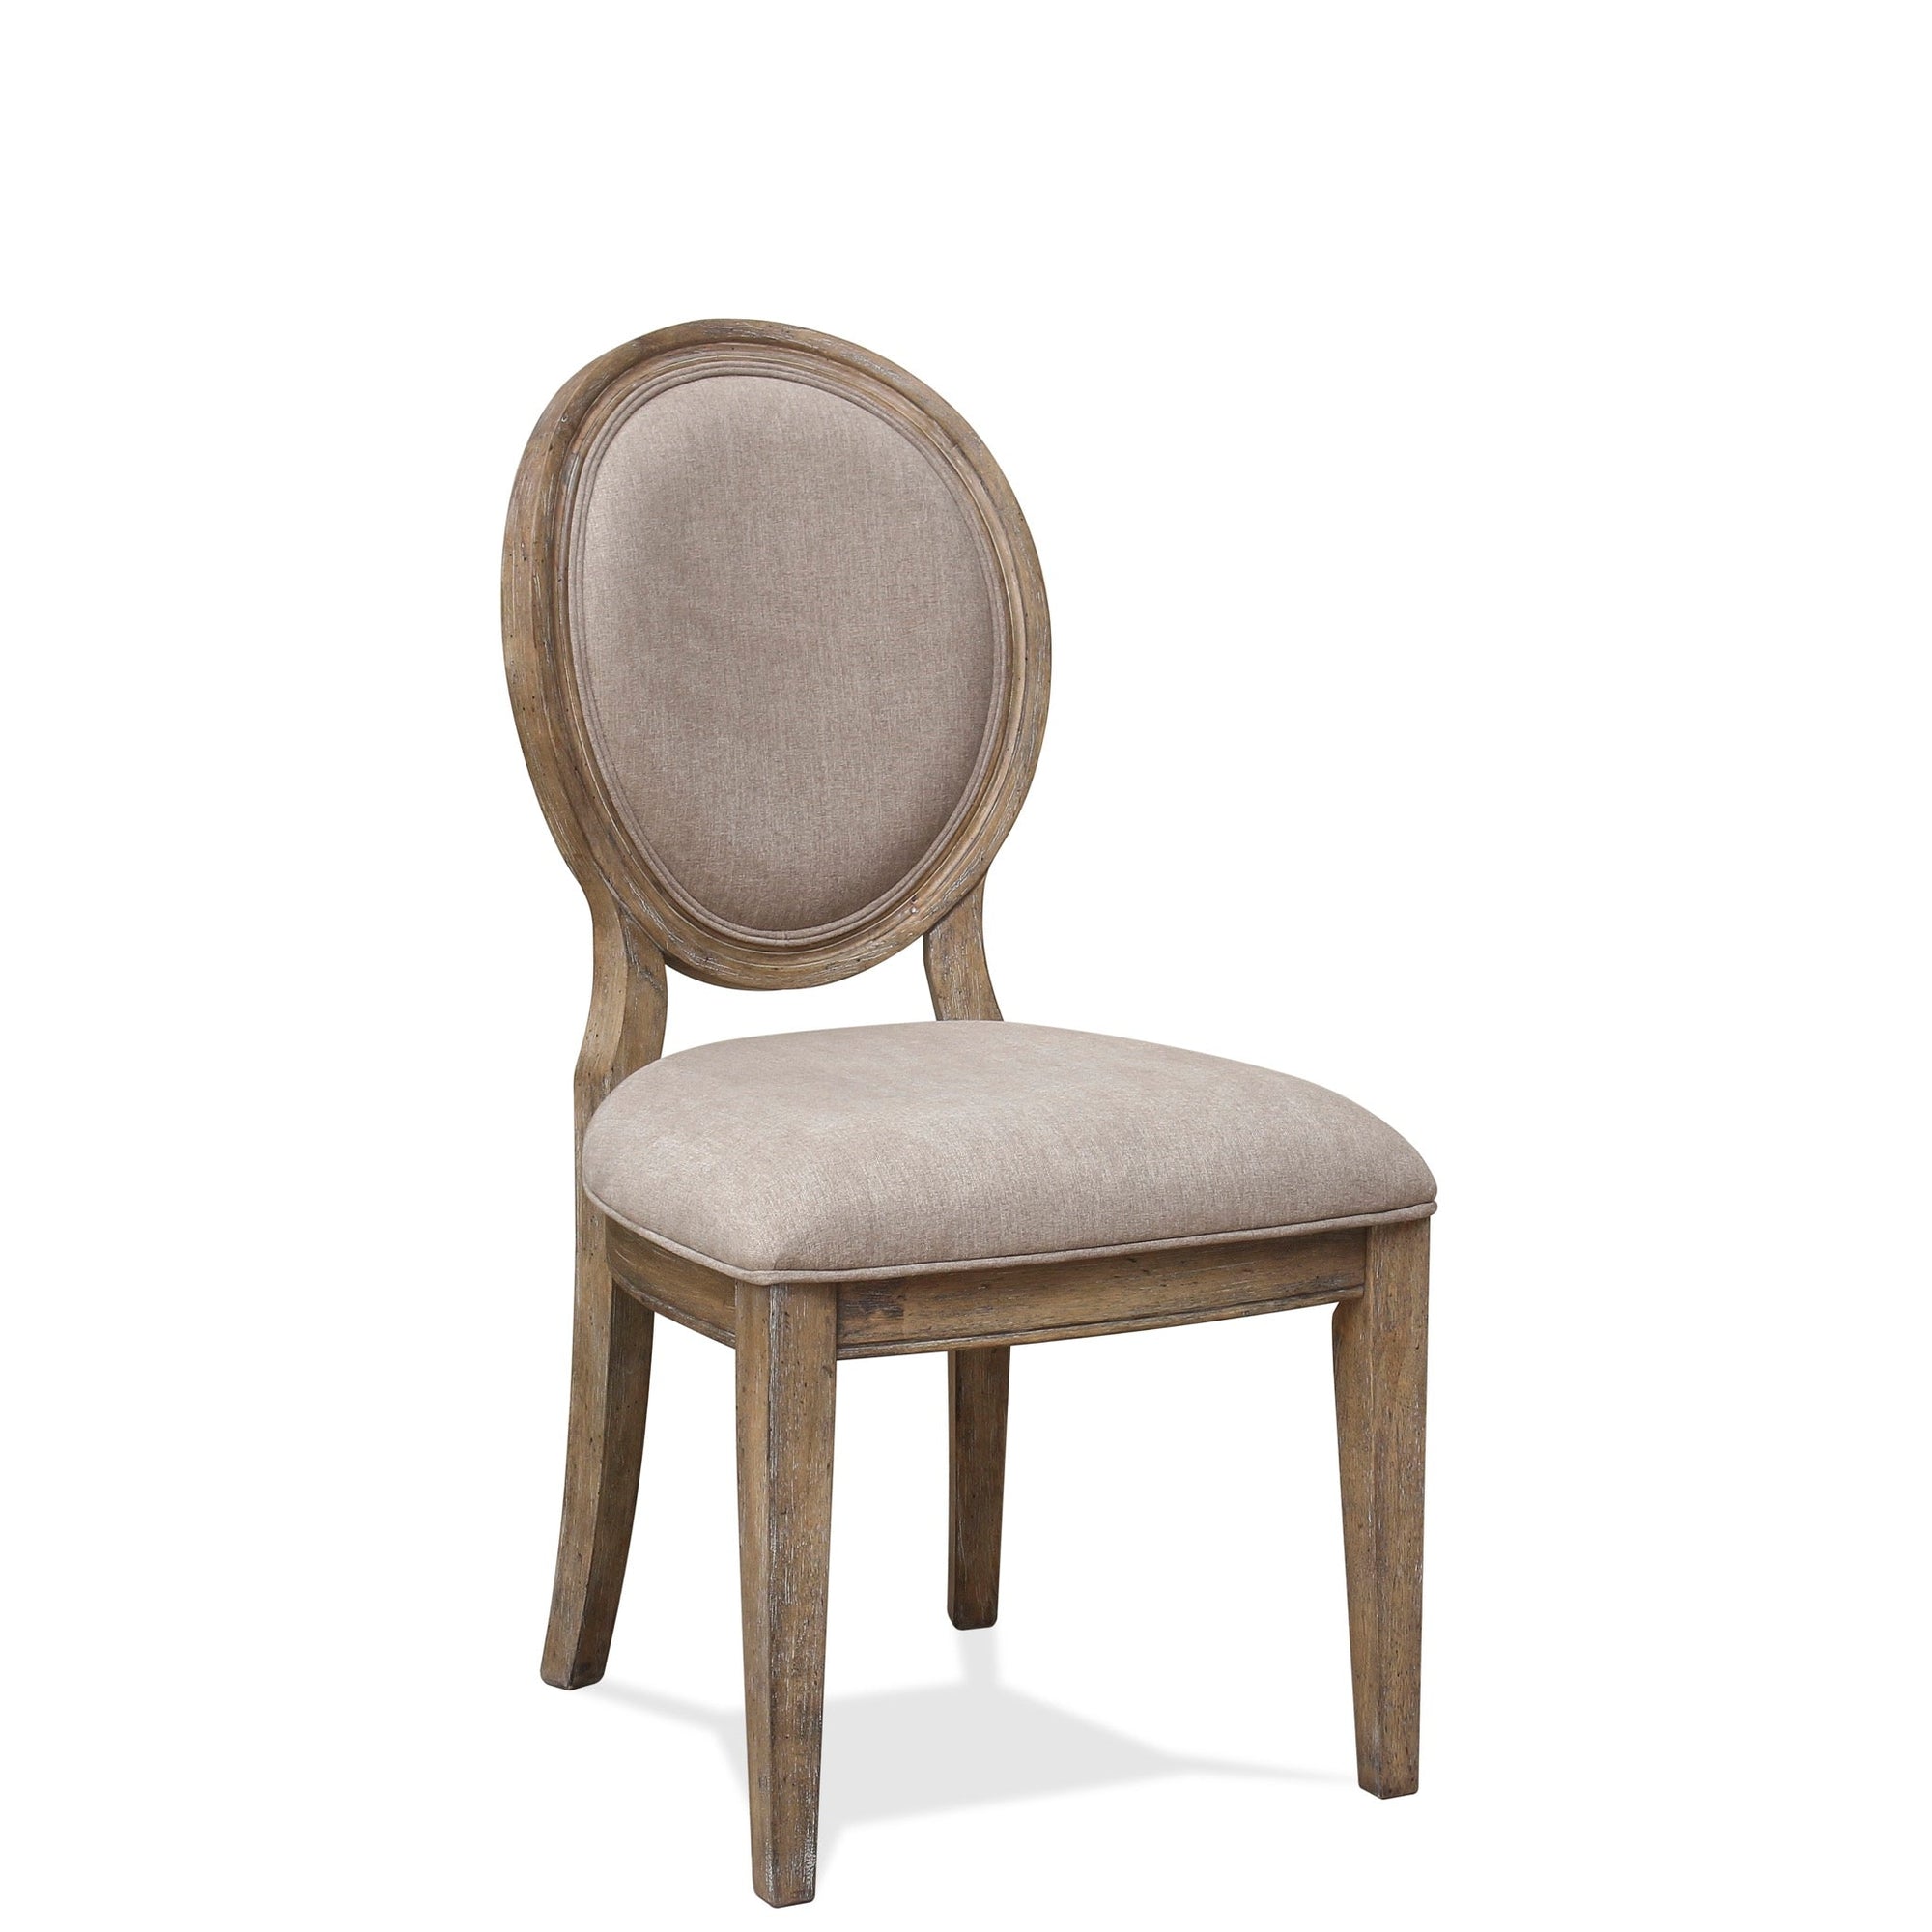 Flagstaff Upholstered Oval Dining Side Chair